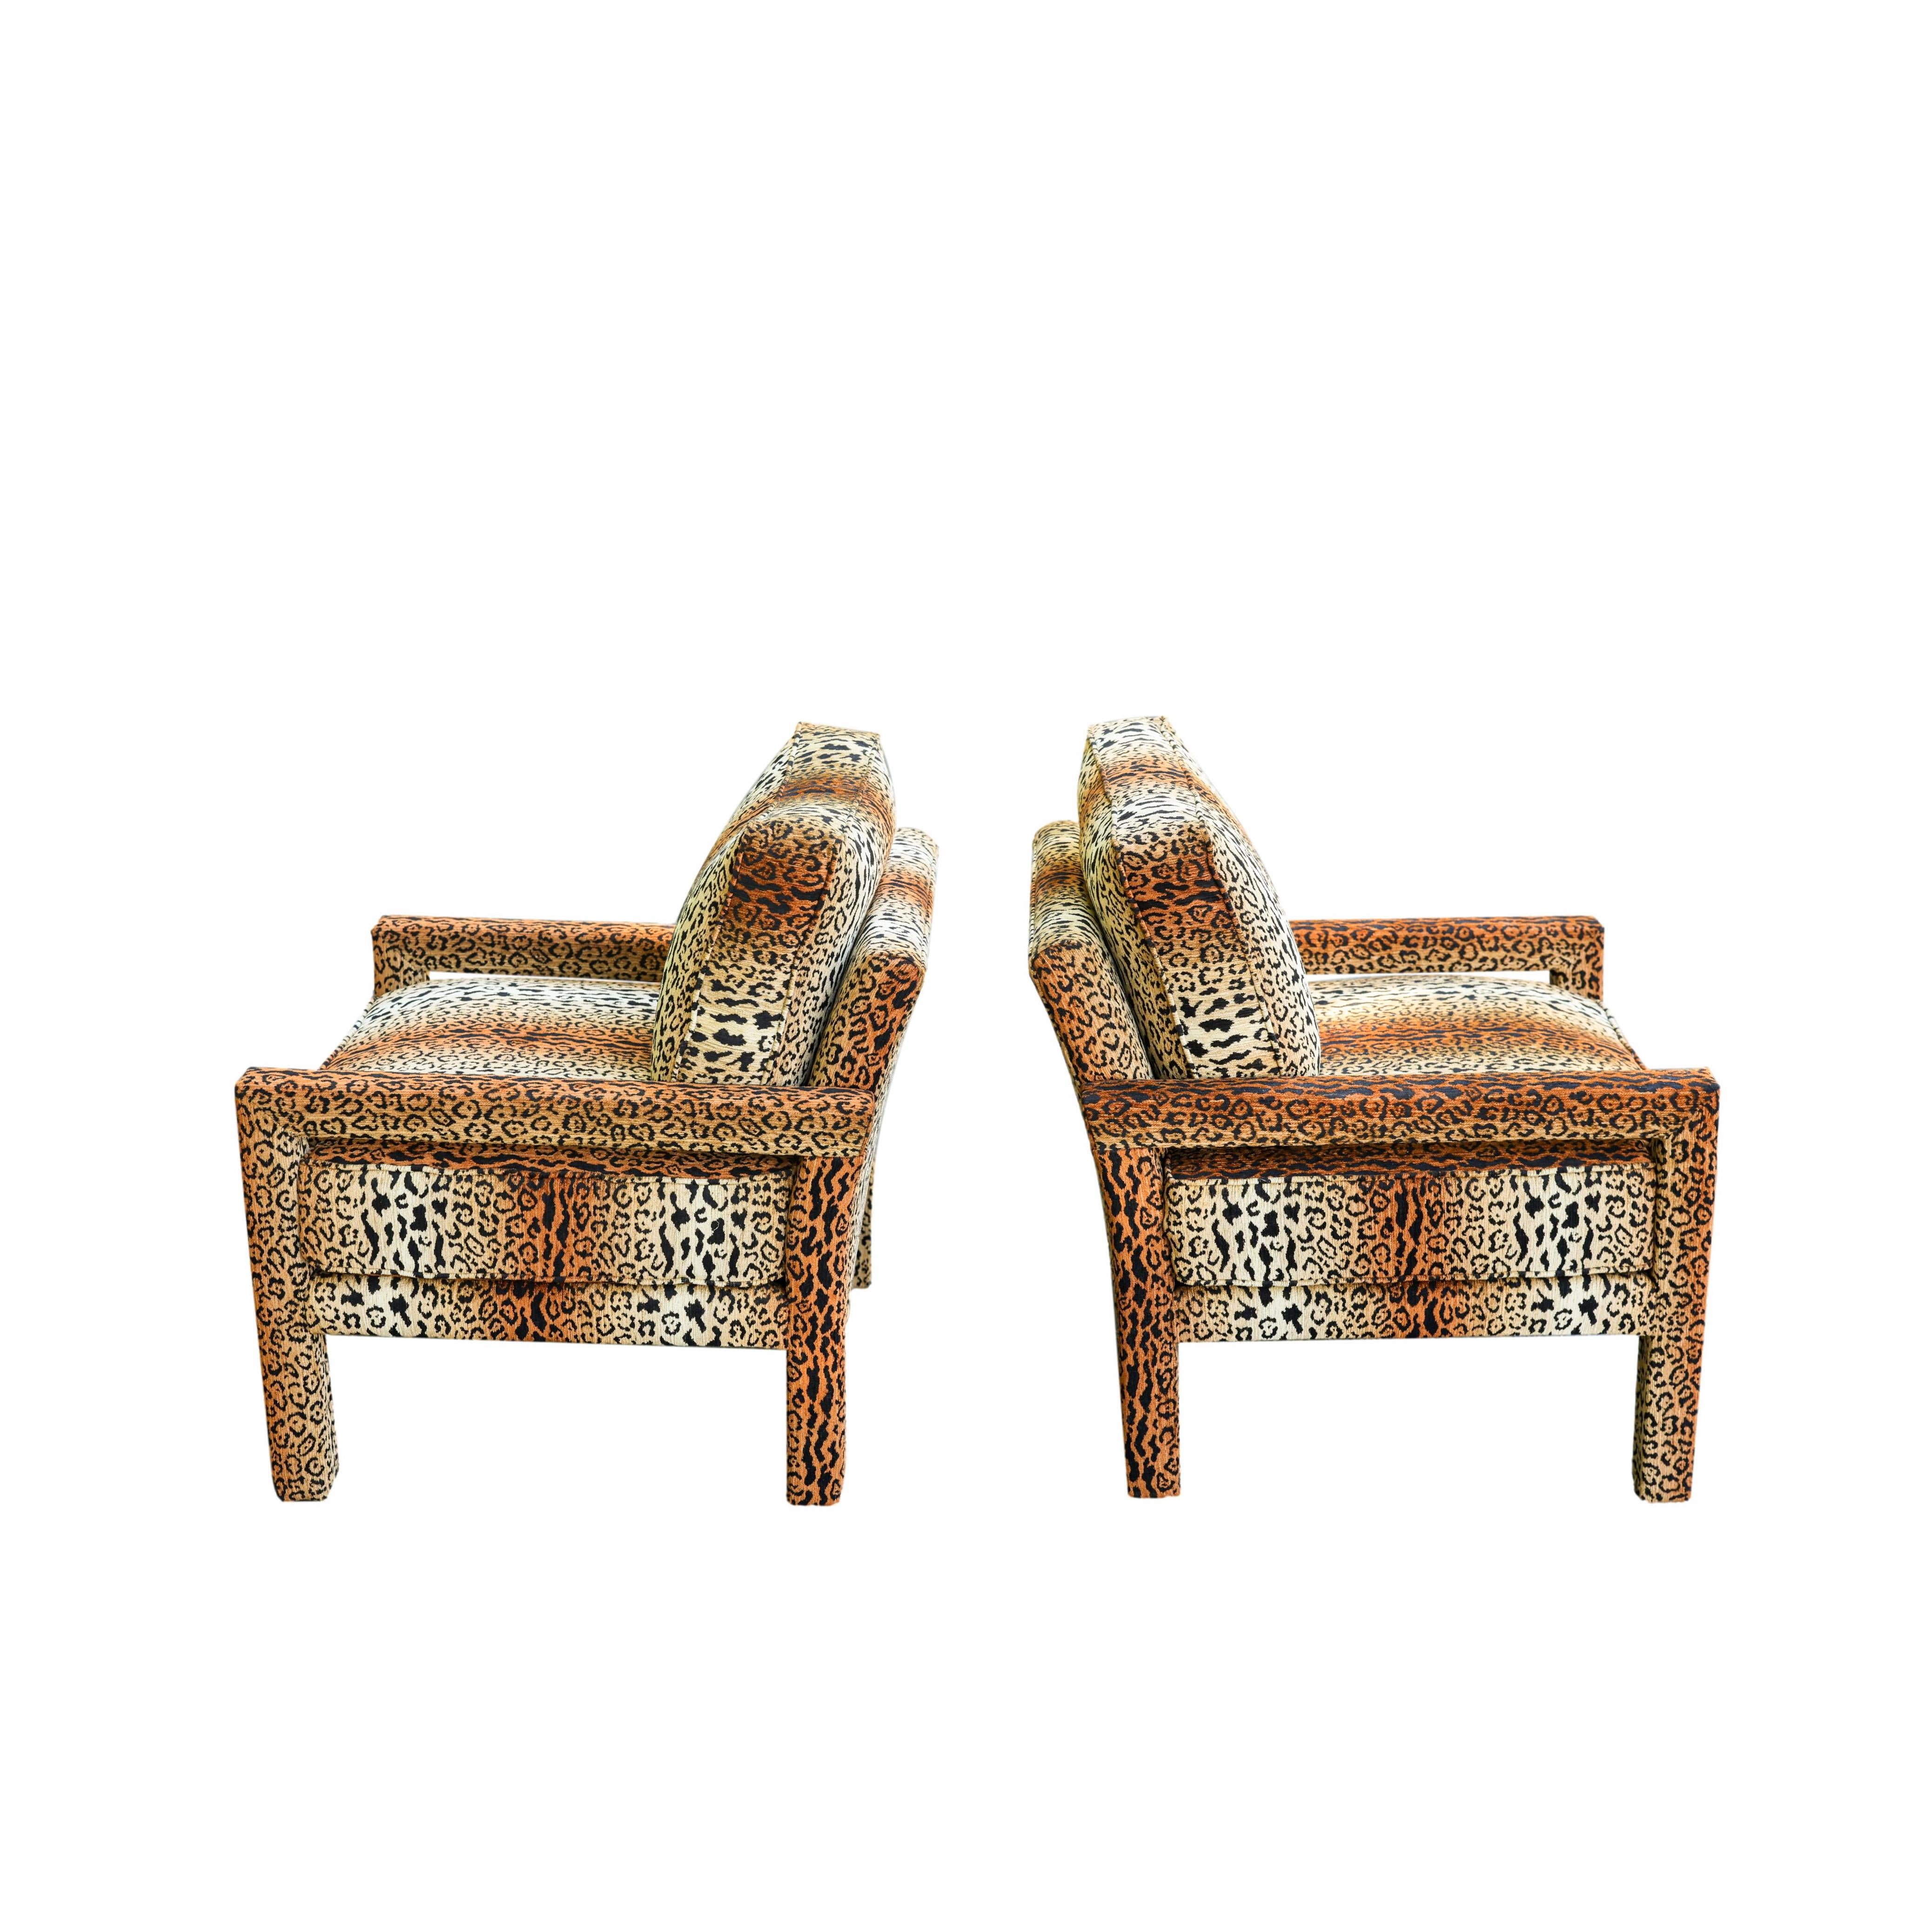 Hand-Crafted Pair of New Milo Baughman-Style Parsons Chairs in Designer Cheetah Velvet